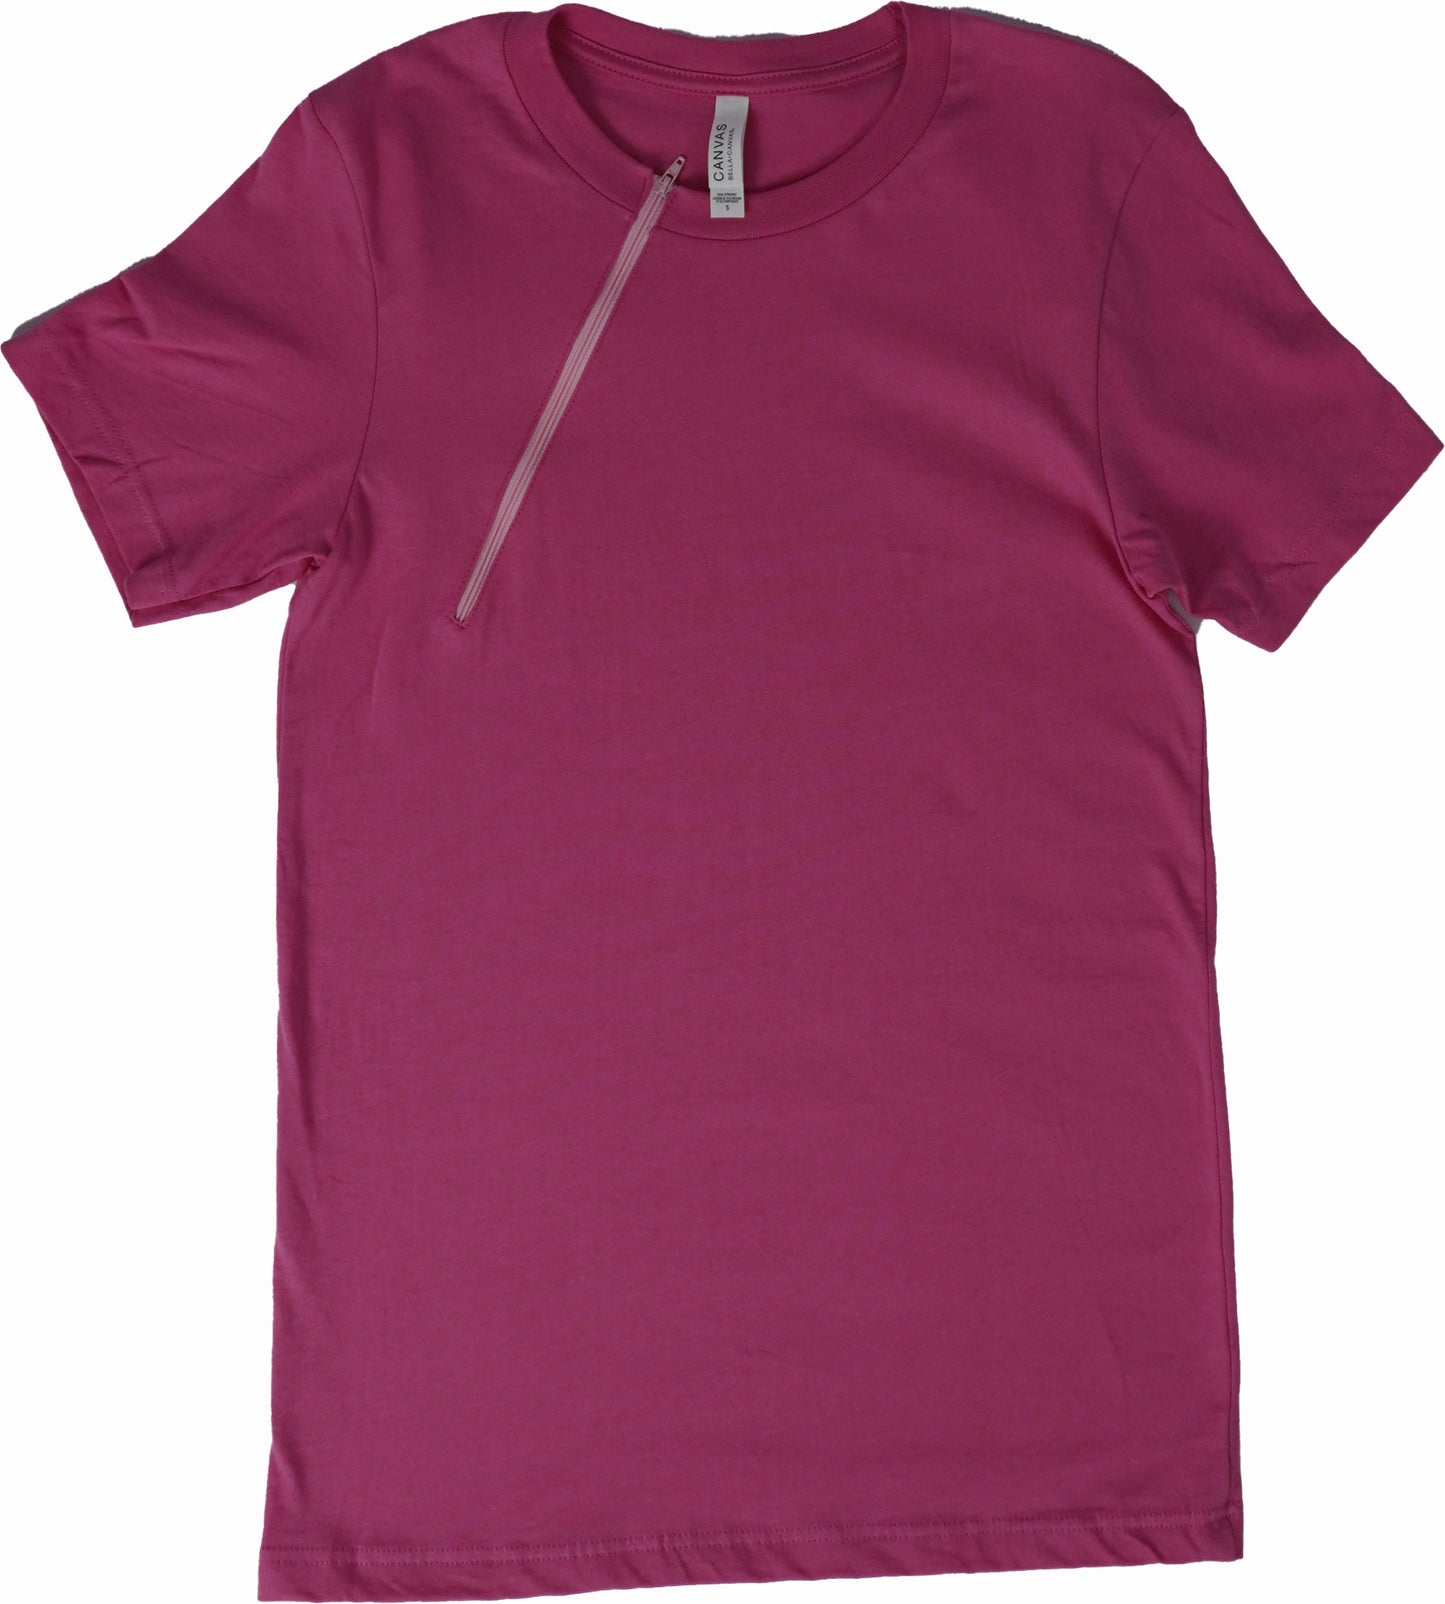 Charity Pink Right Side Port Shirt